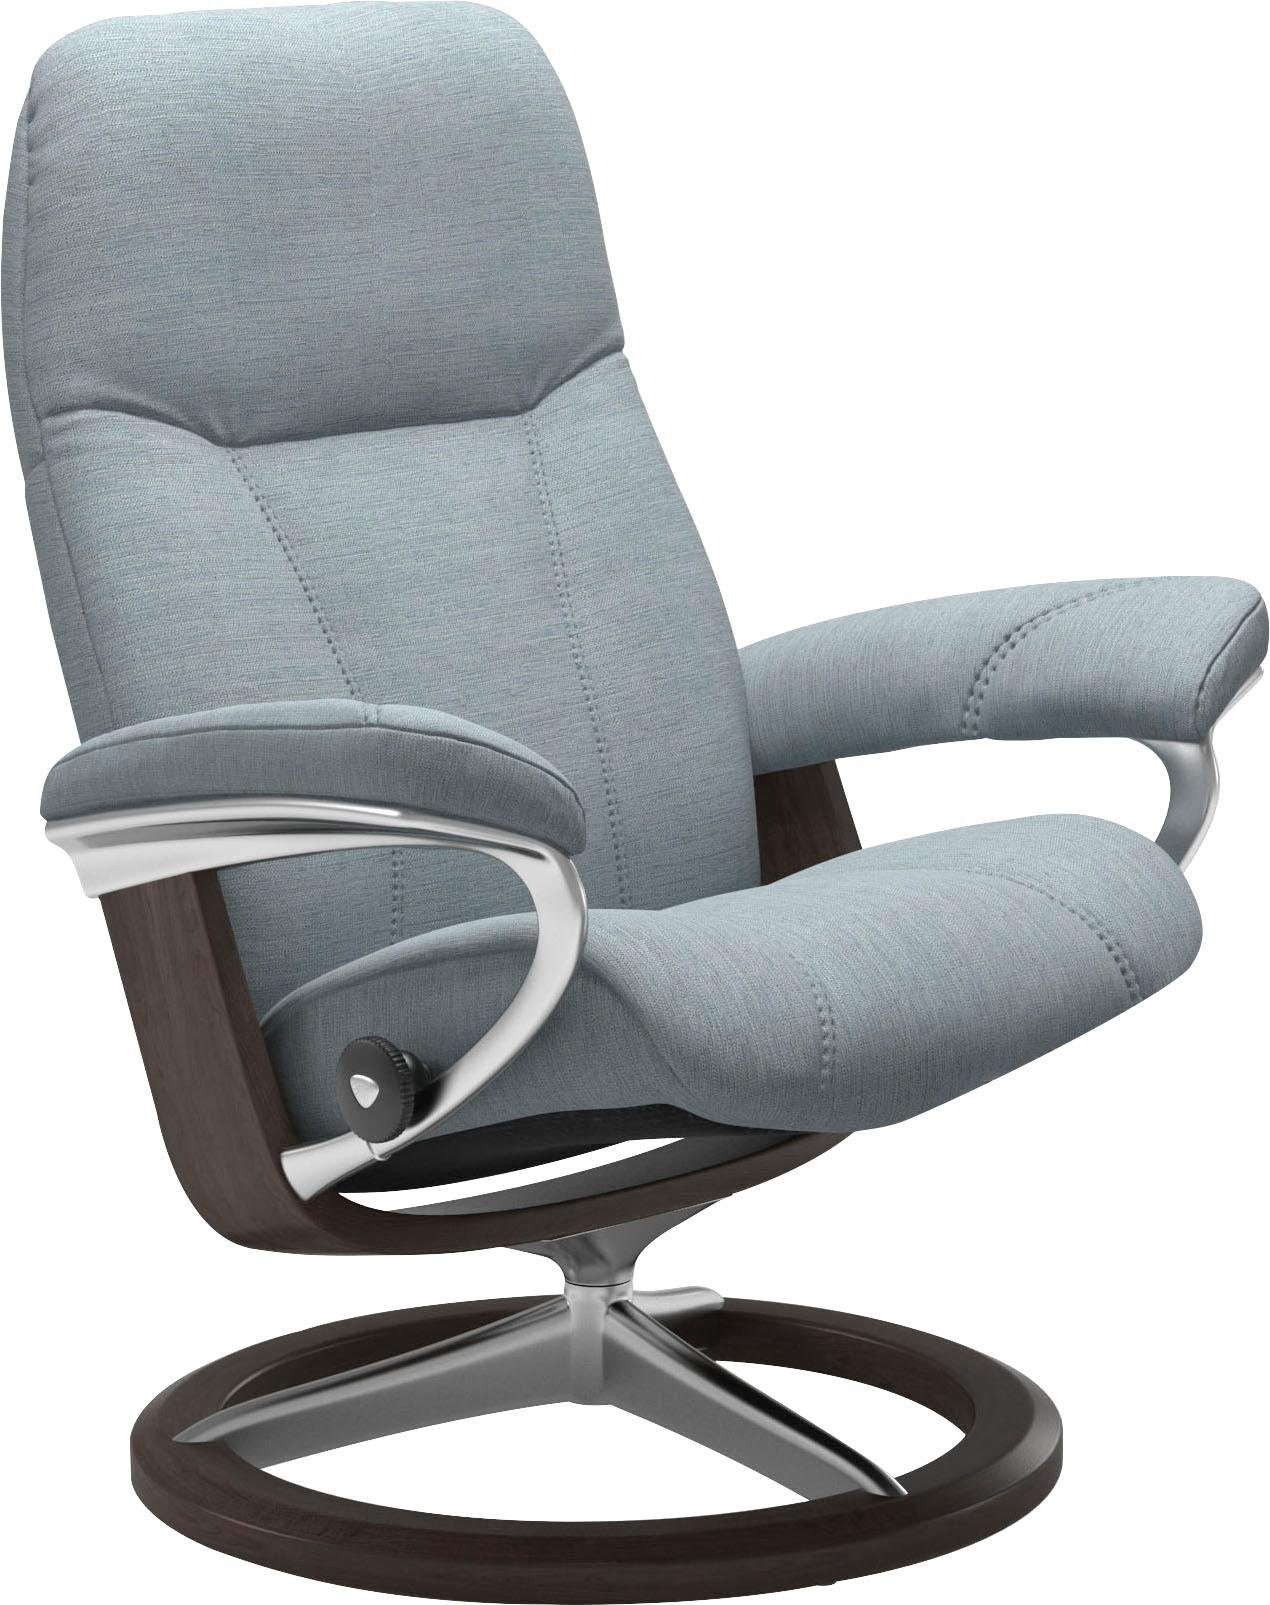 Stressless® mit Wenge Base, Consul, Gestell Größe Relaxsessel L, Signature